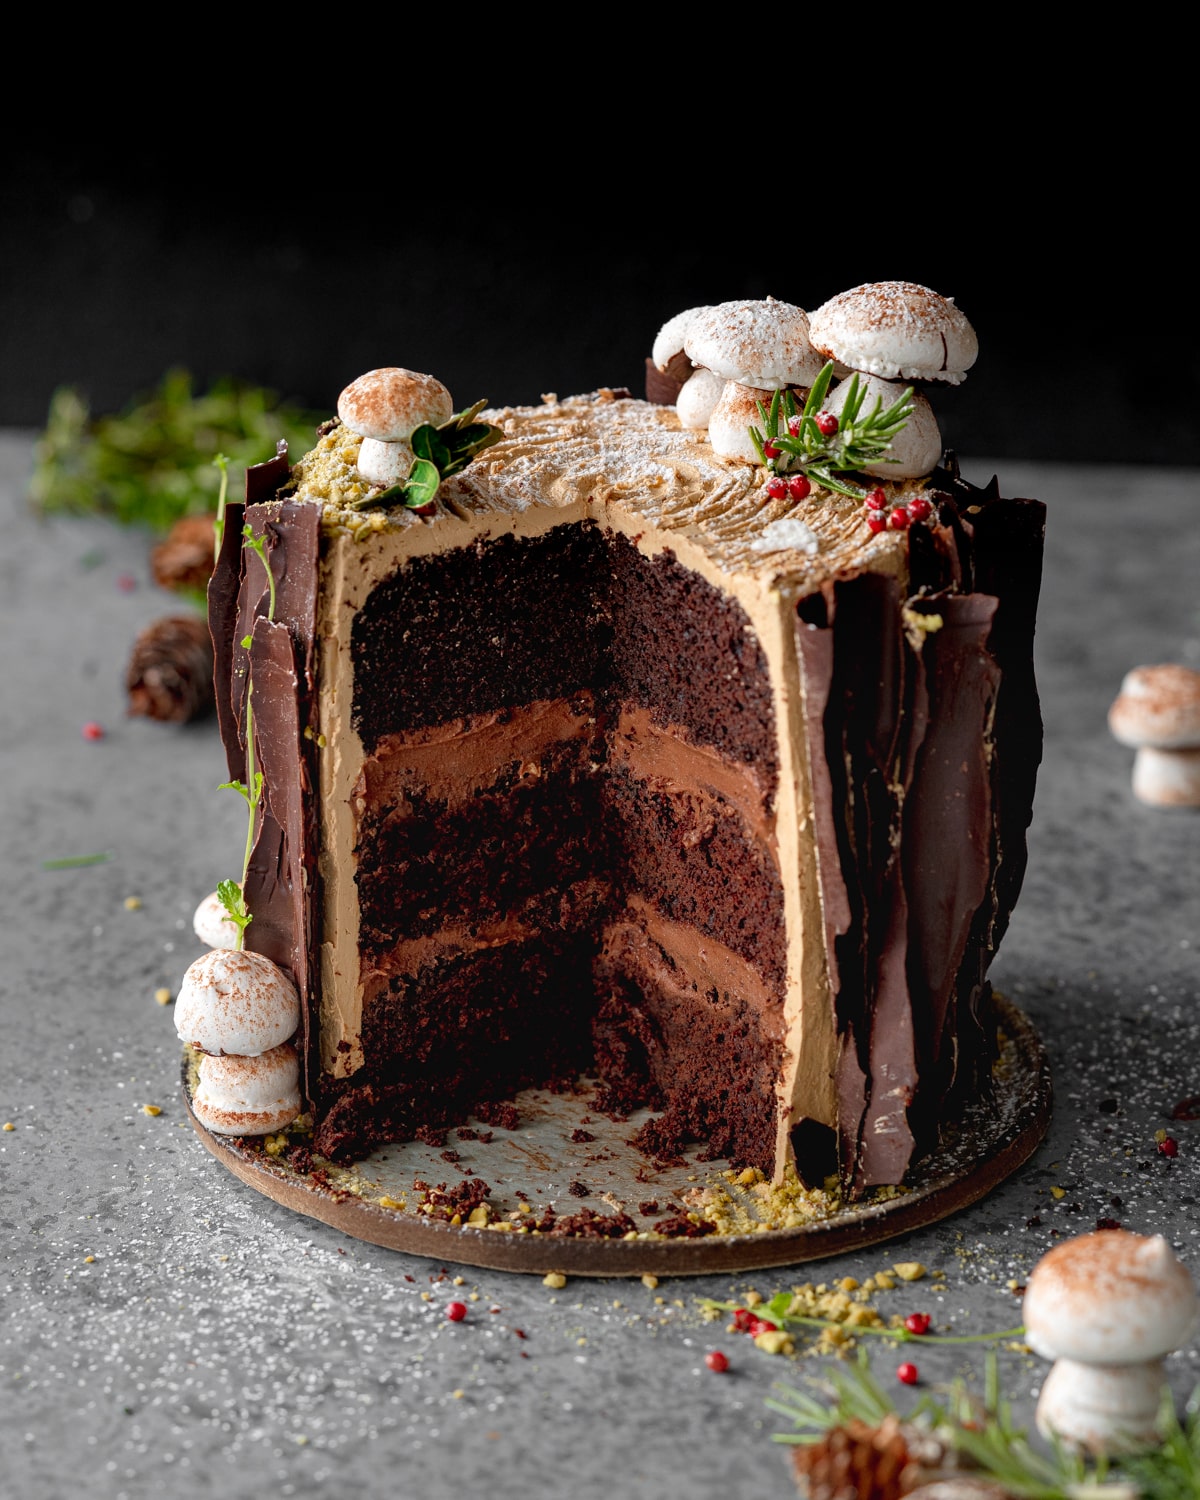 chocolate tree stump cake with layers of chocolate cremeux filling, chocolate bark and meringue mushrooms on top.